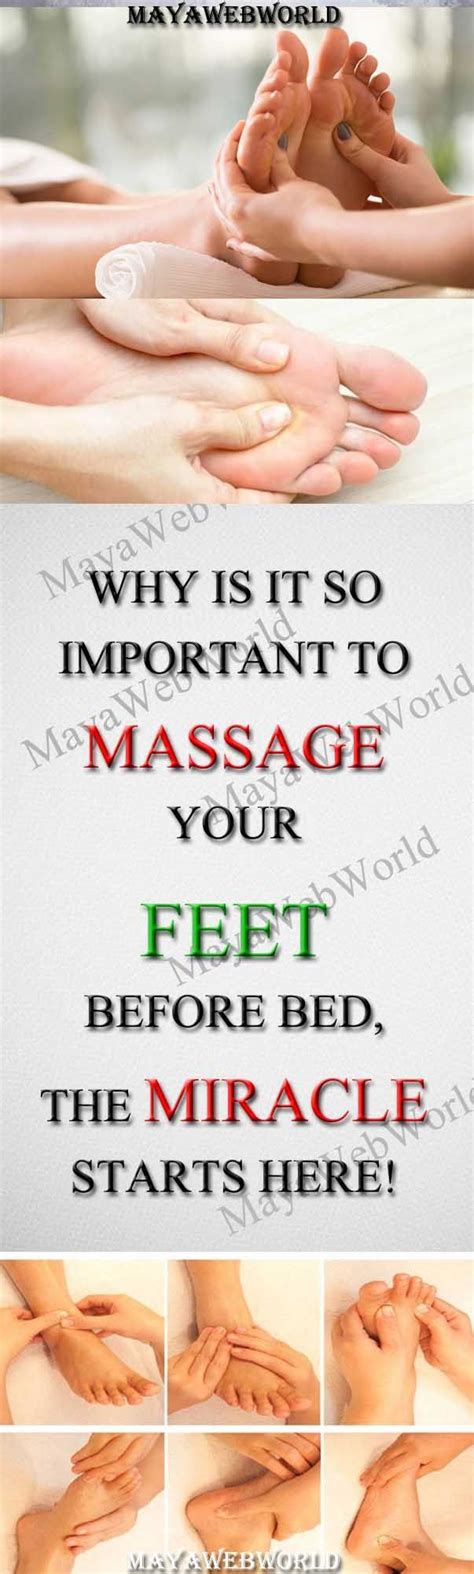 Why Is It So Important To Massage Your Feet Before Bed The Miracle Starts Here Mayawebworld